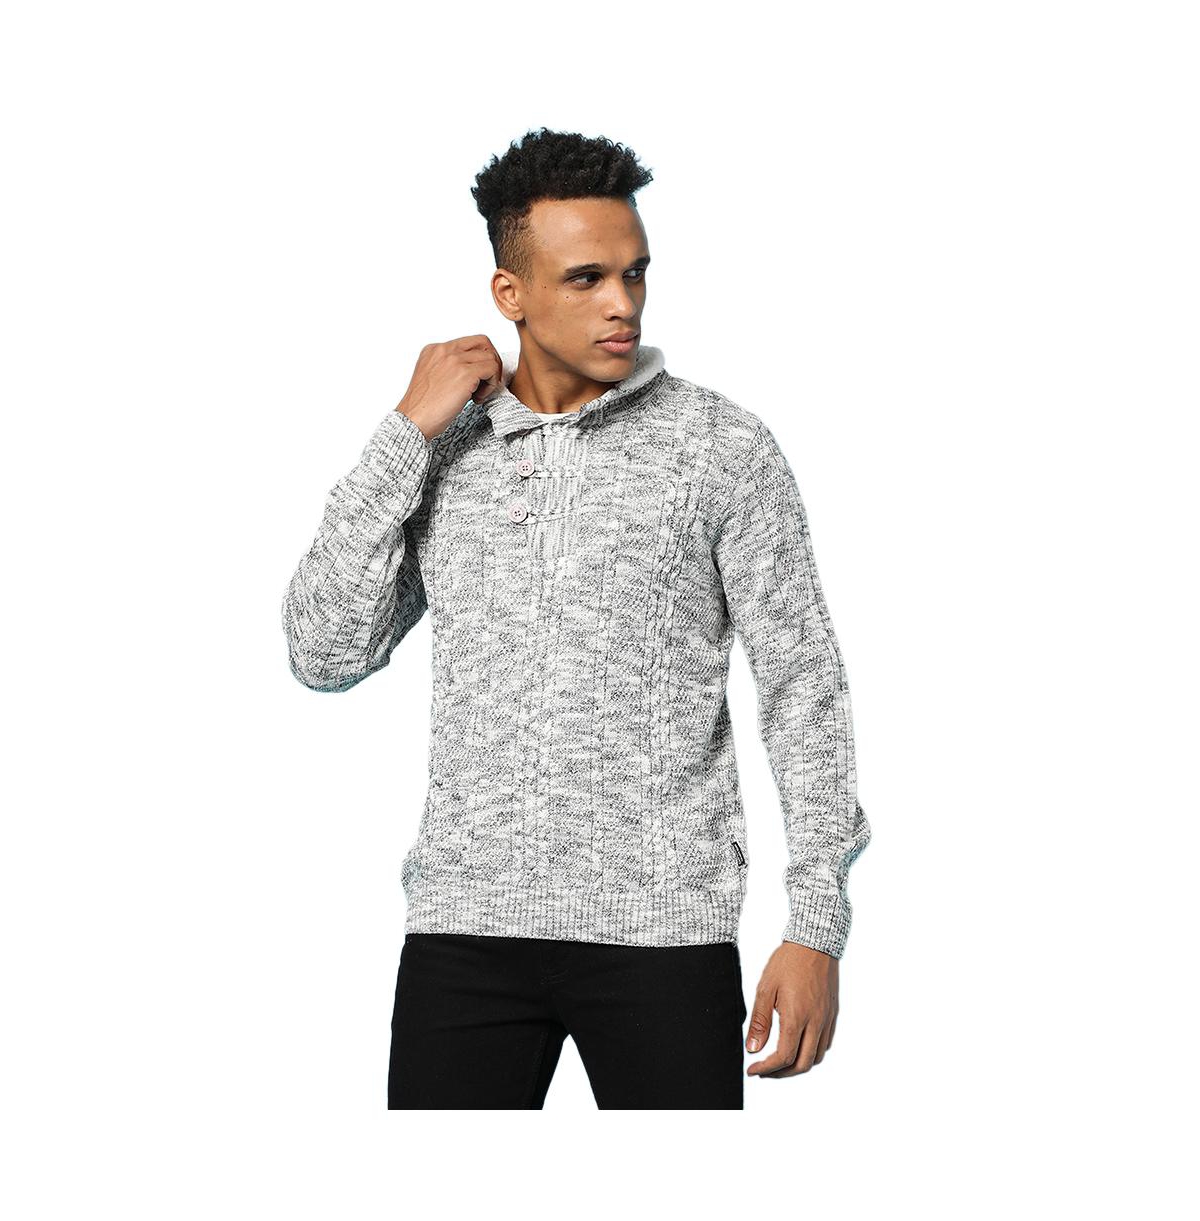 Men's Grey Heathered Cable Knit Sweater - Grey